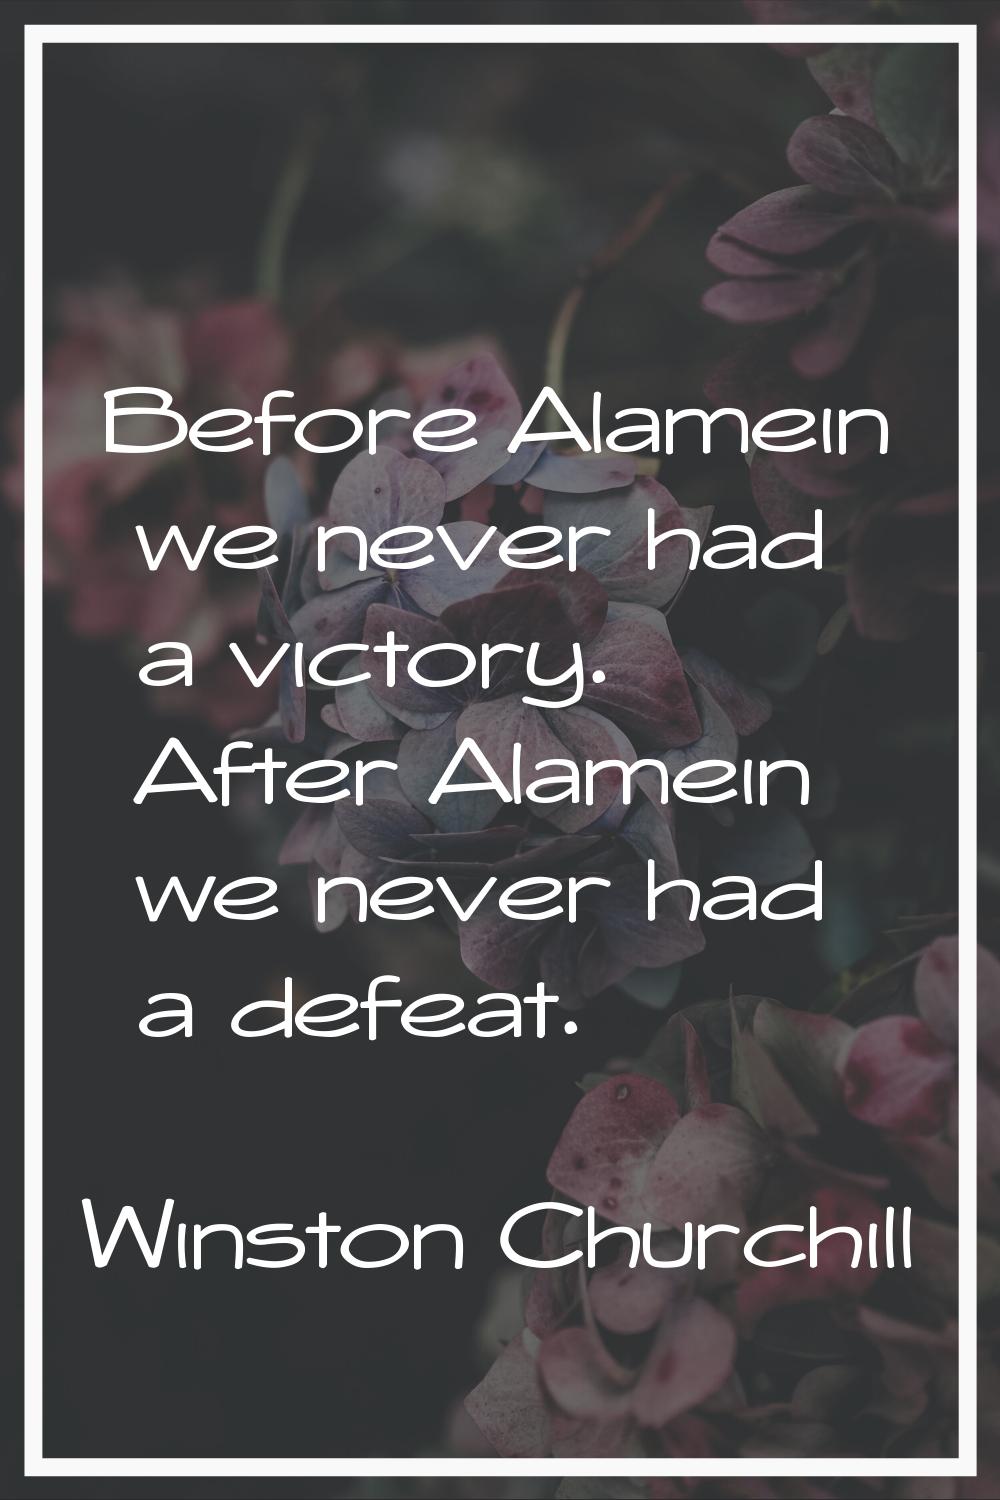 Before Alamein we never had a victory. After Alamein we never had a defeat.